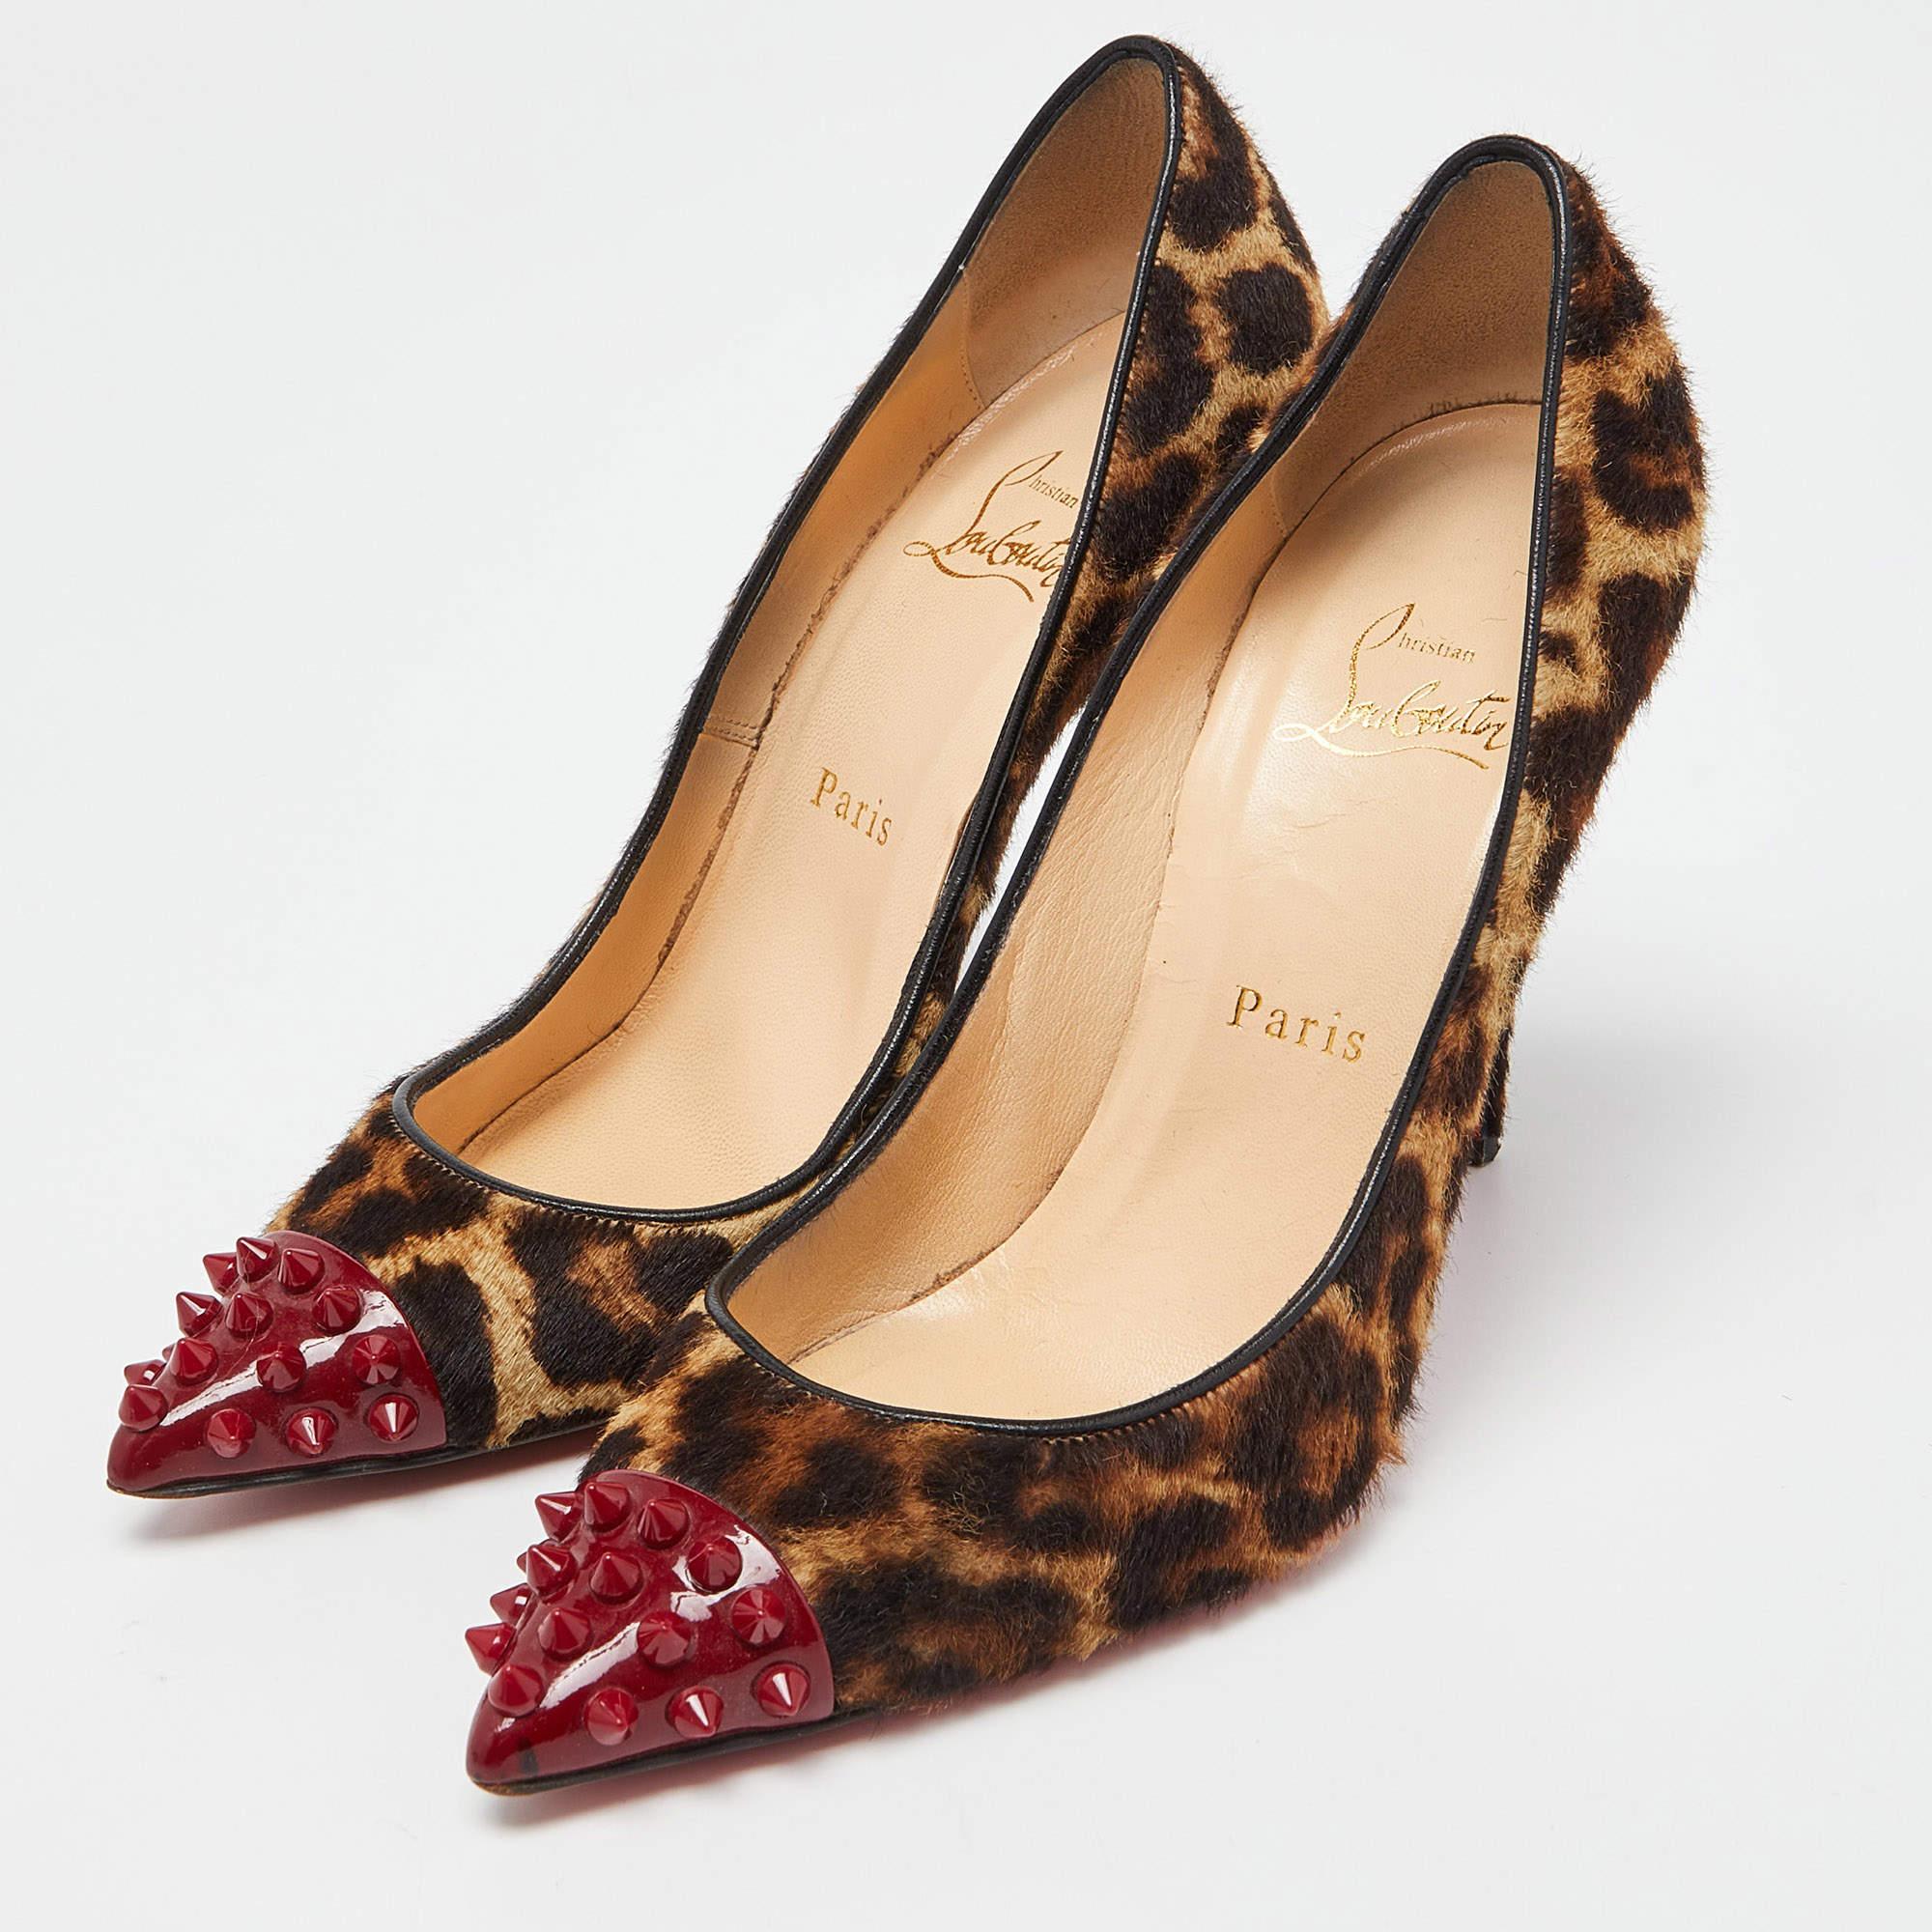 The fashion house’s tradition of excellence, coupled with modern design sensibilities, works to make these Christian Louboutin pumps a fabulous choice. They'll help you deliver a chic look with ease.

